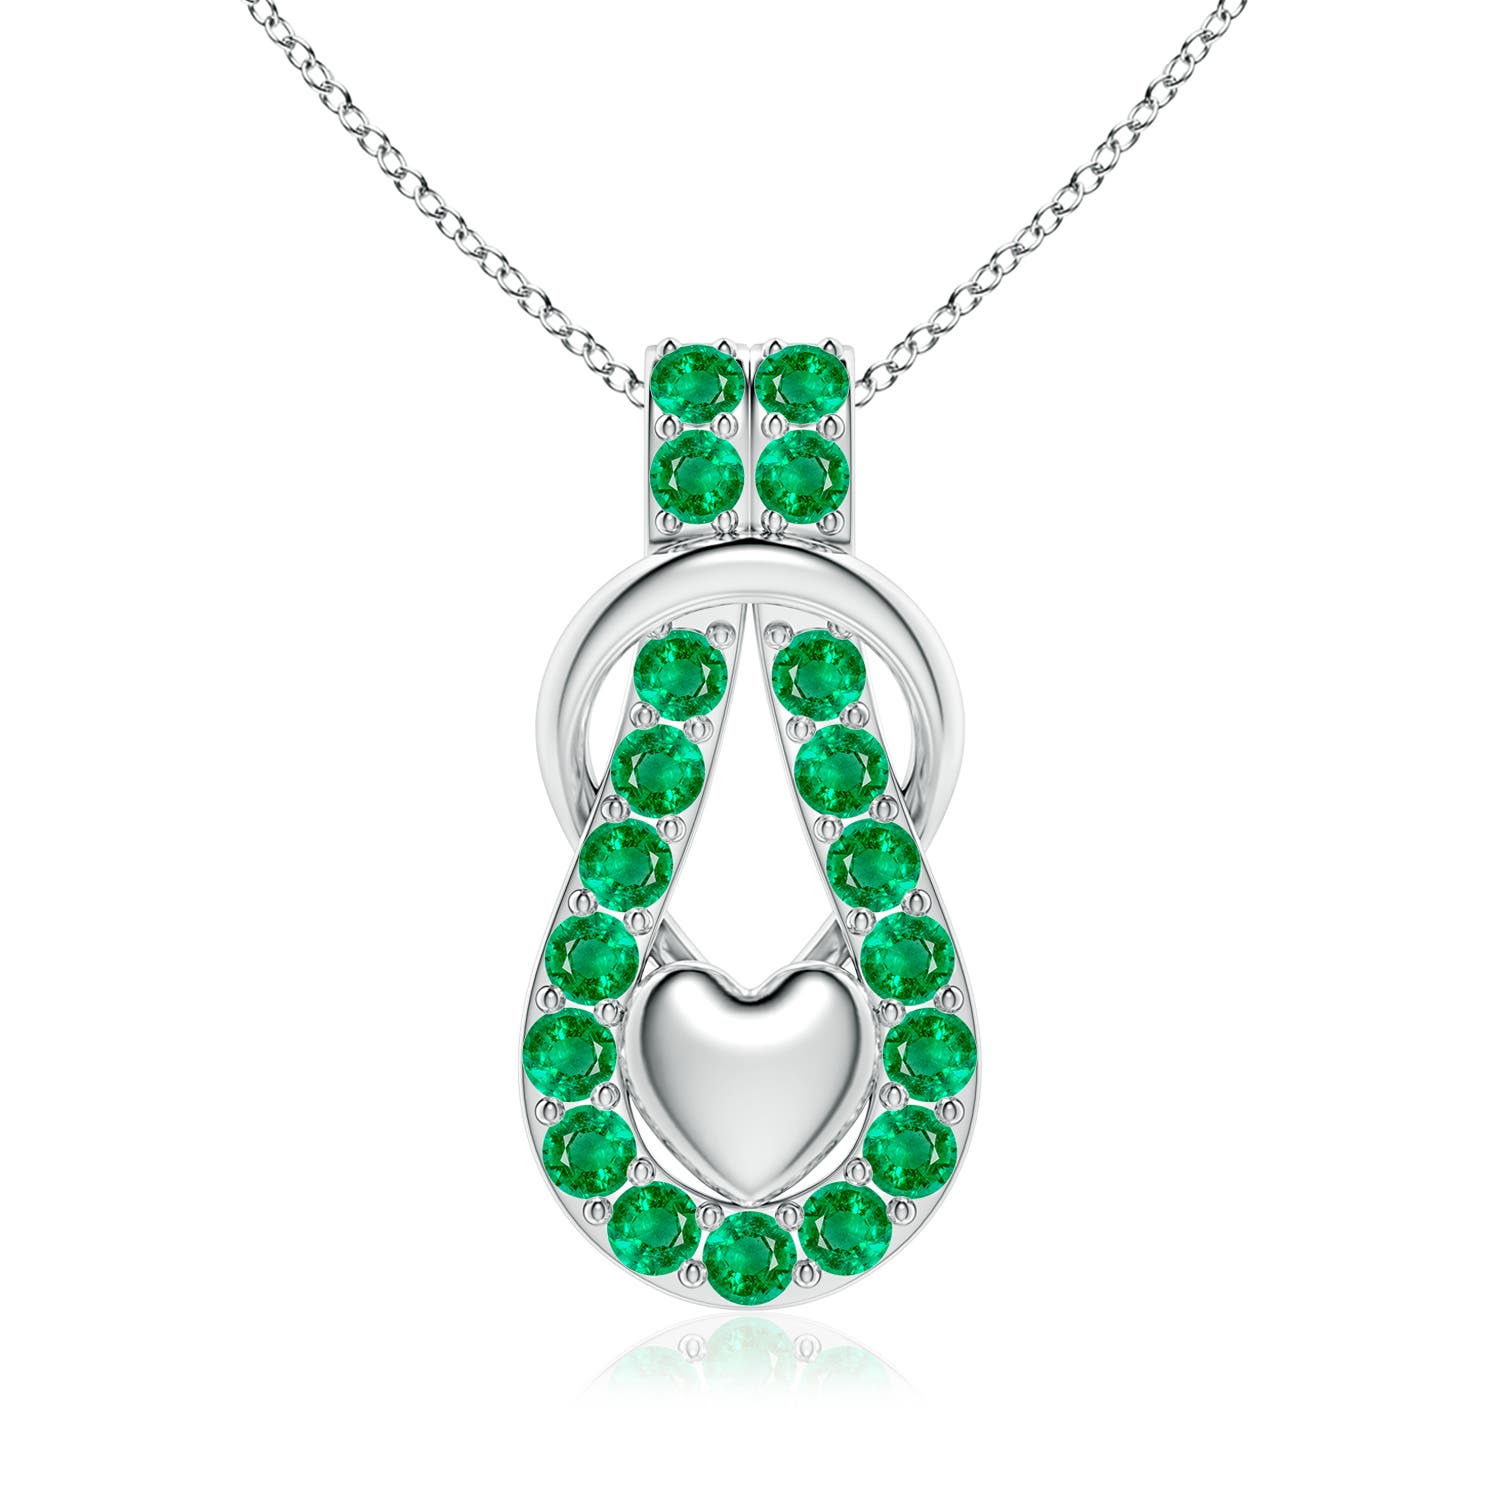 AAA - Emerald / 2.85 CT / 14 KT White Gold